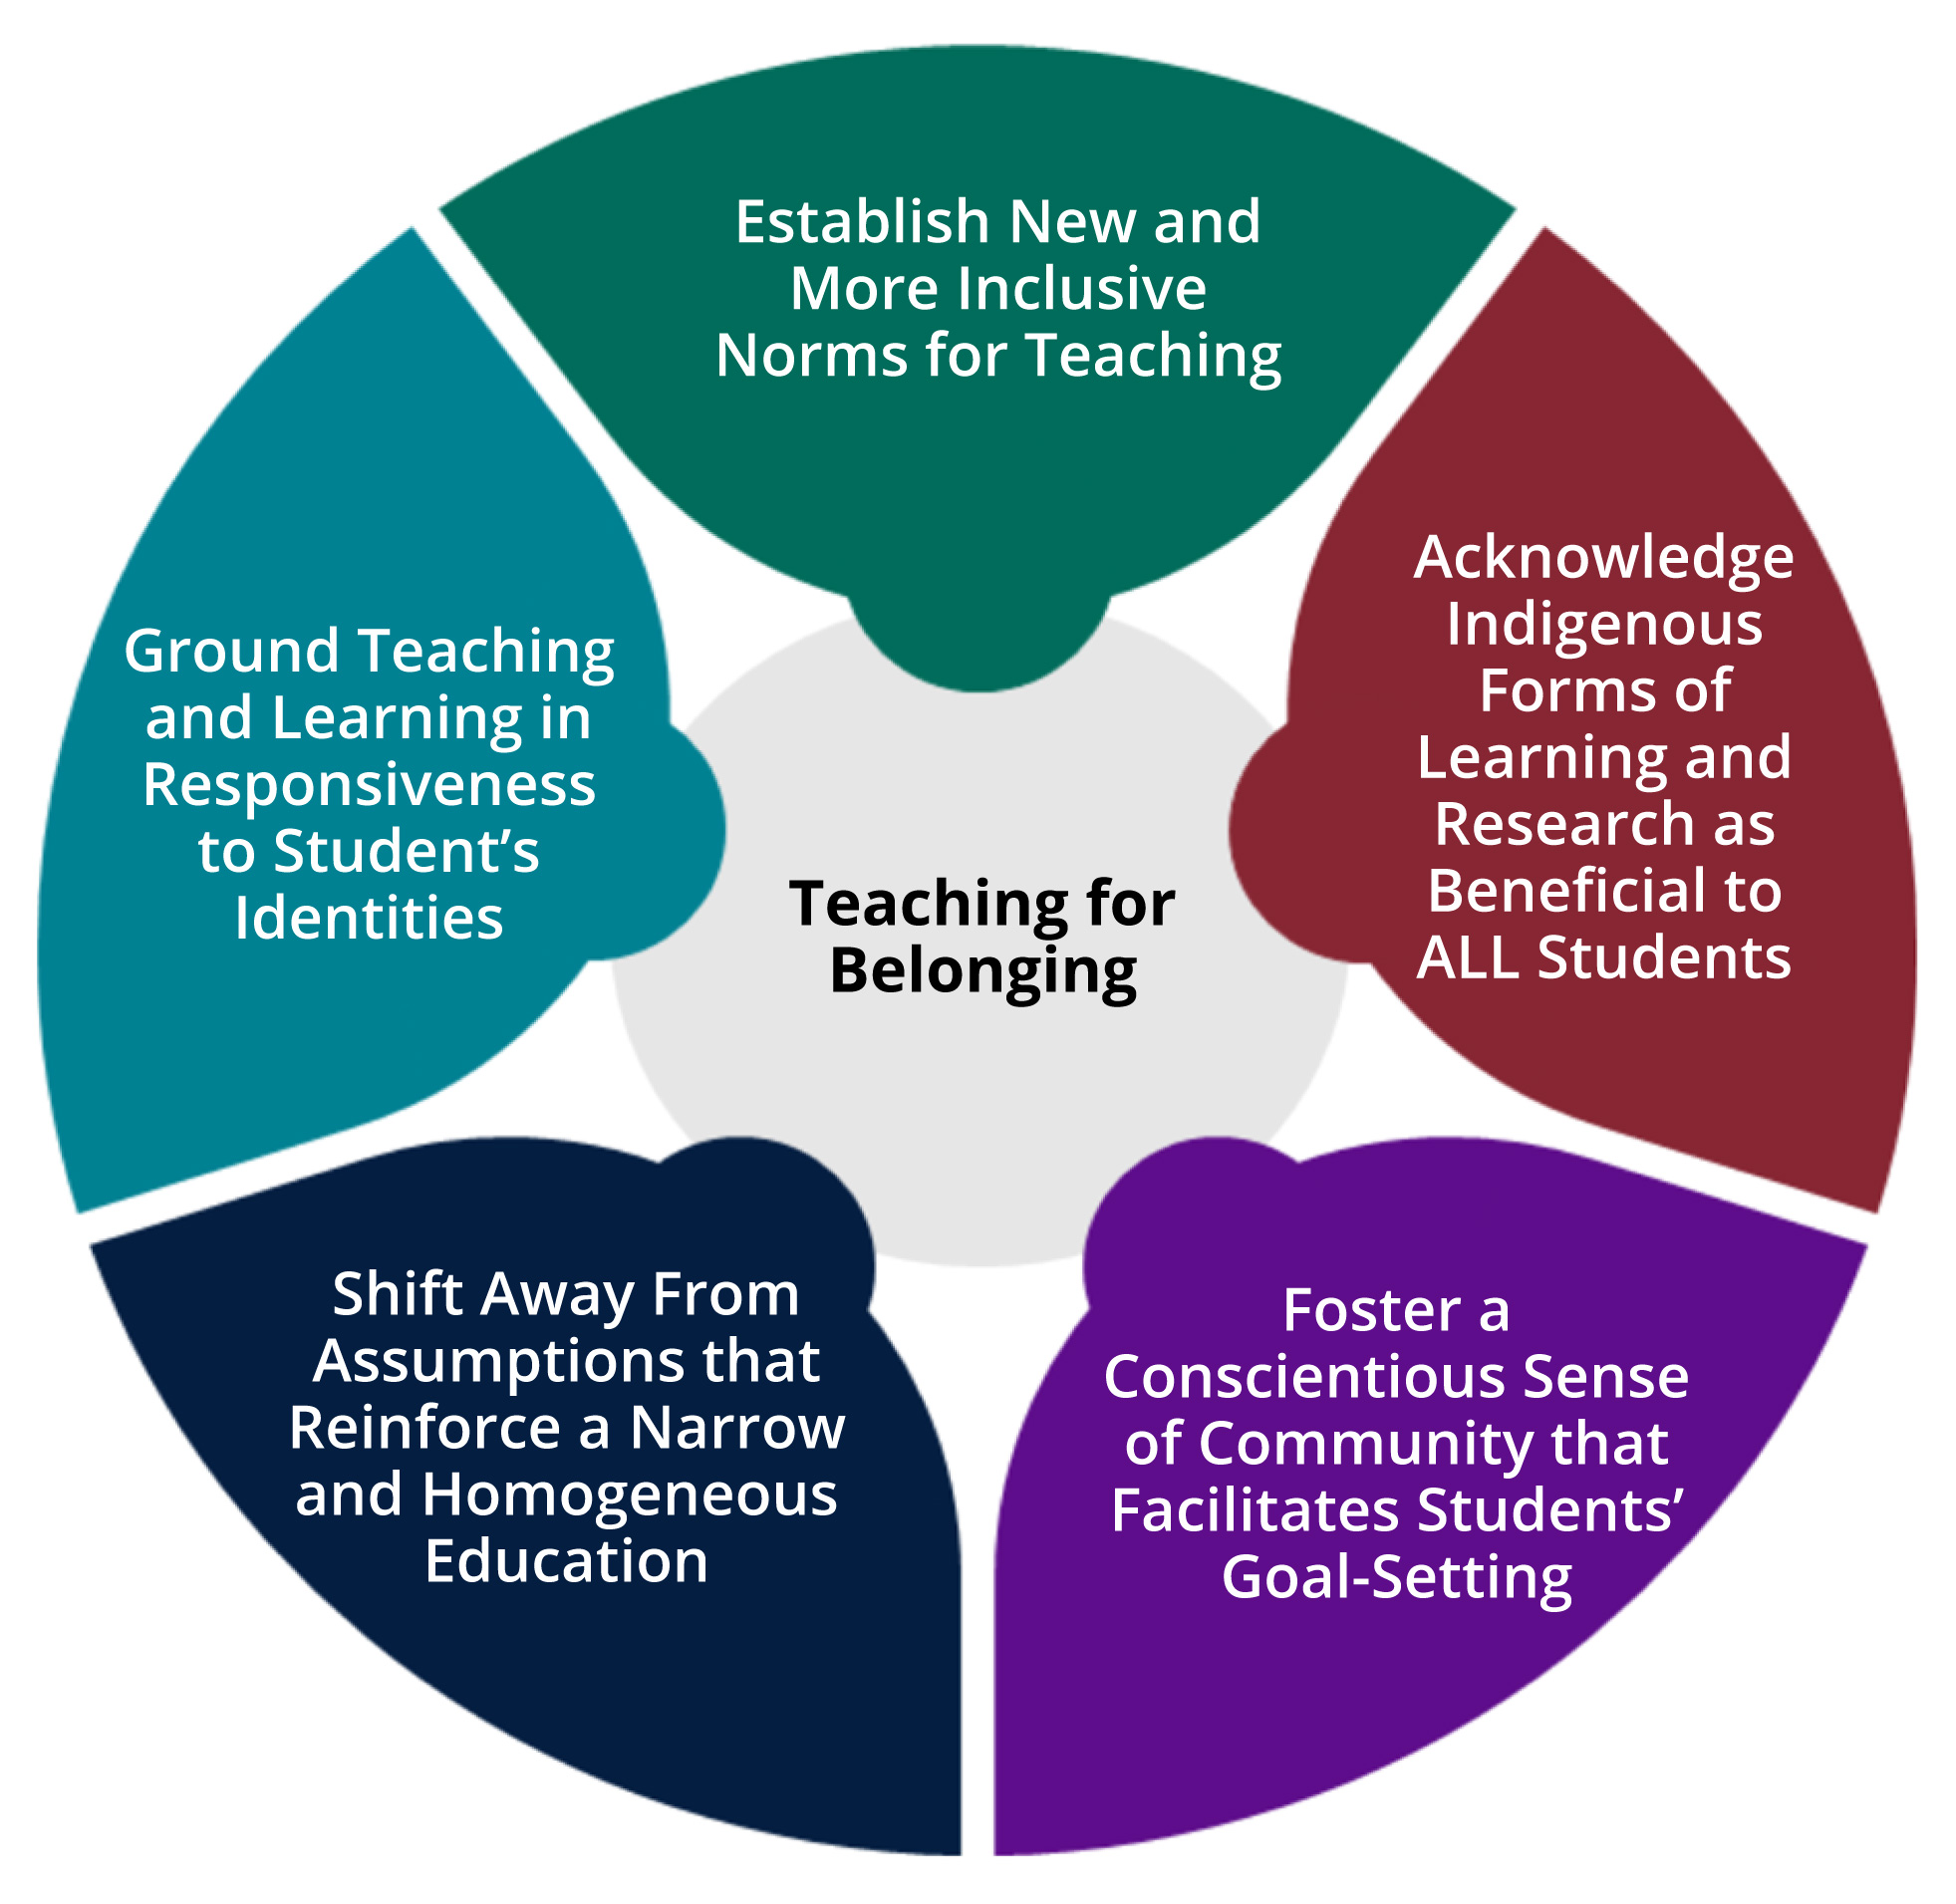 Teaching for belonging is grounded in a number of theoretical components including: establishing more inclusive norms for teaching; acknowledging Indigenous forms of learning and research as beneficial to all students; fostering a community that facilitates student goal setting; shifting away from assumptions that reinforce a homogeneous education; and grounding teaching and learning in responsiveness to students' identities​